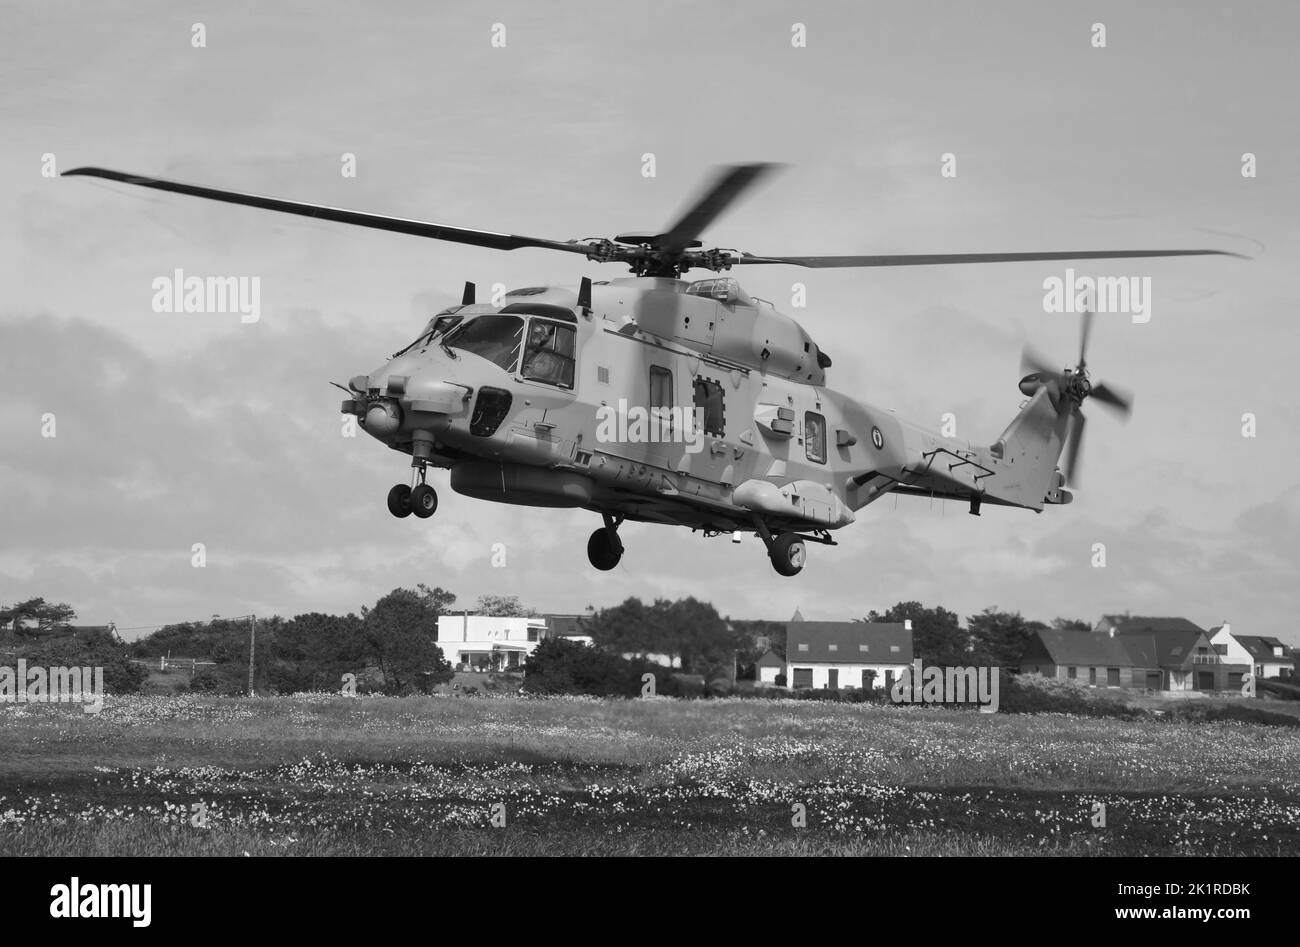 A military helicopter on the clifftops, Barneville-Carteret, Cotentin Peninsula, Normandy, France, Europe Stock Photo